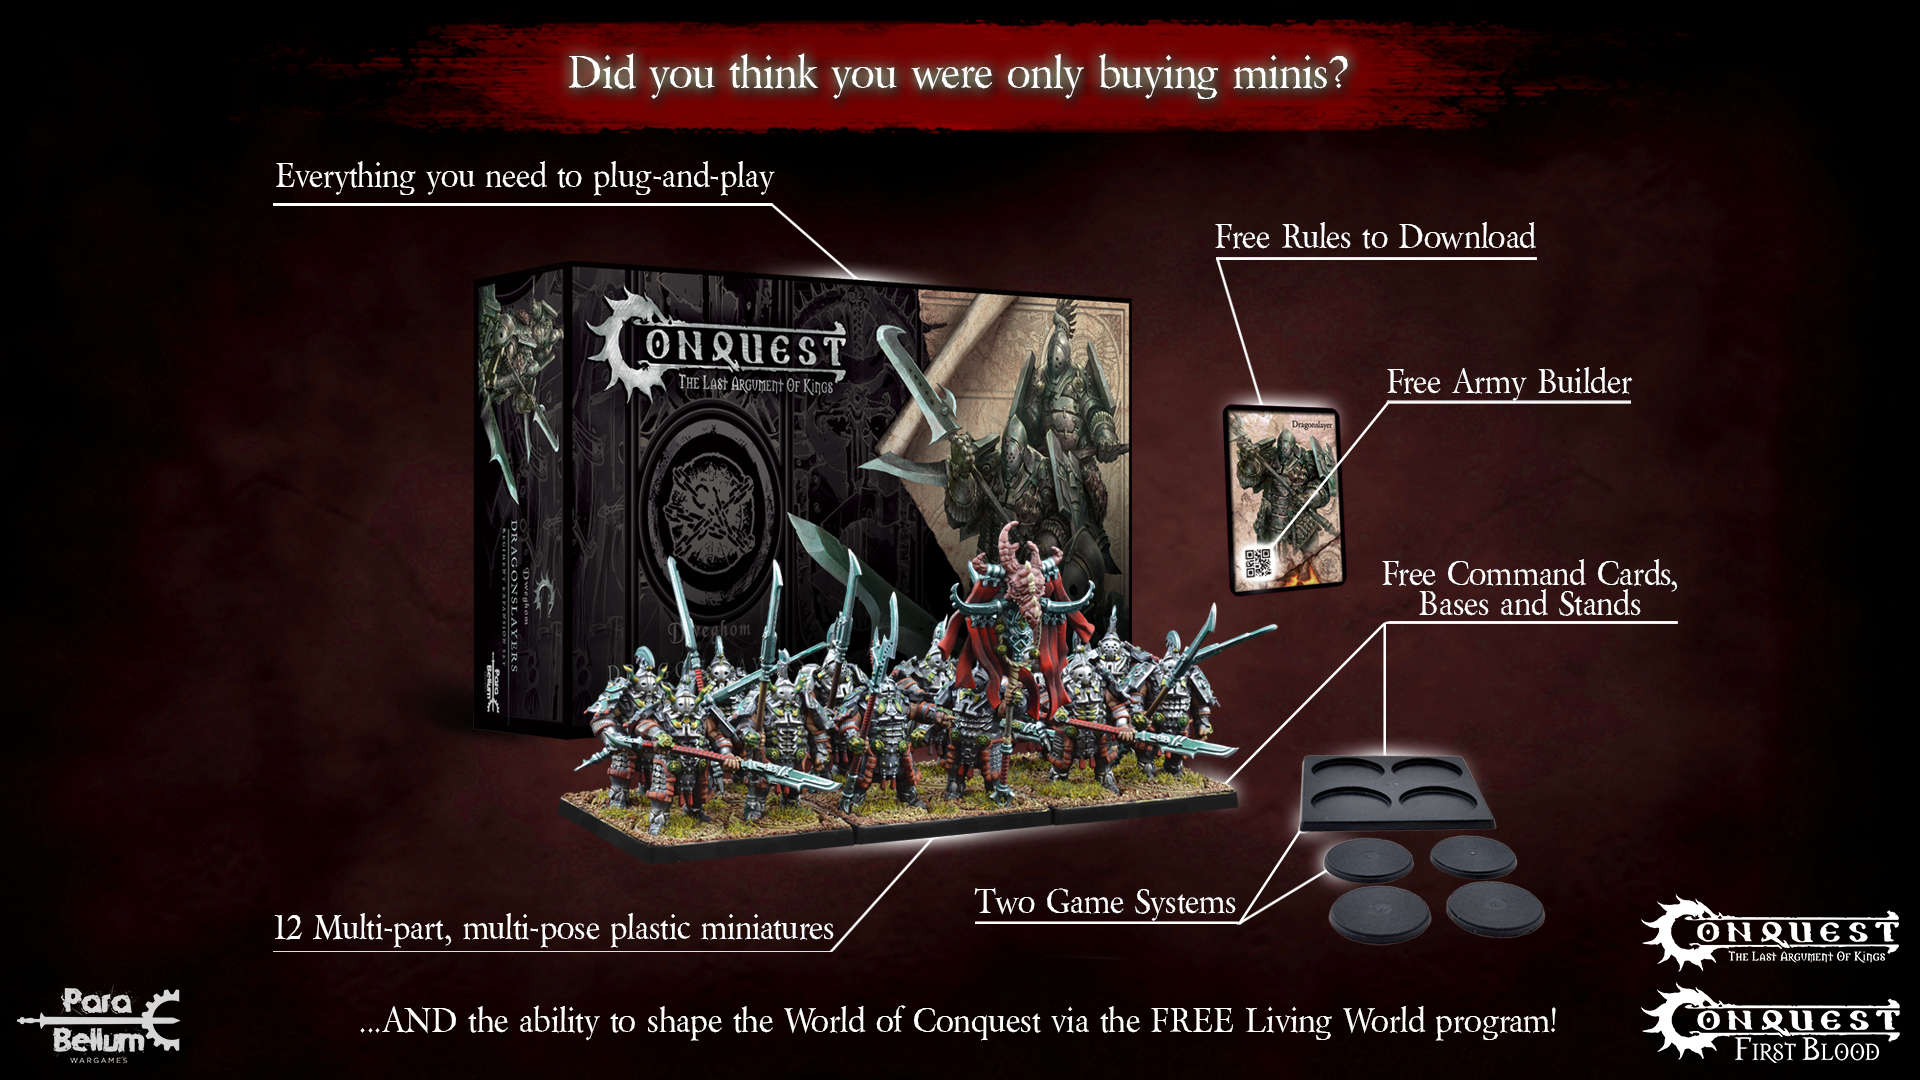 Conquest: More than boxes with minis